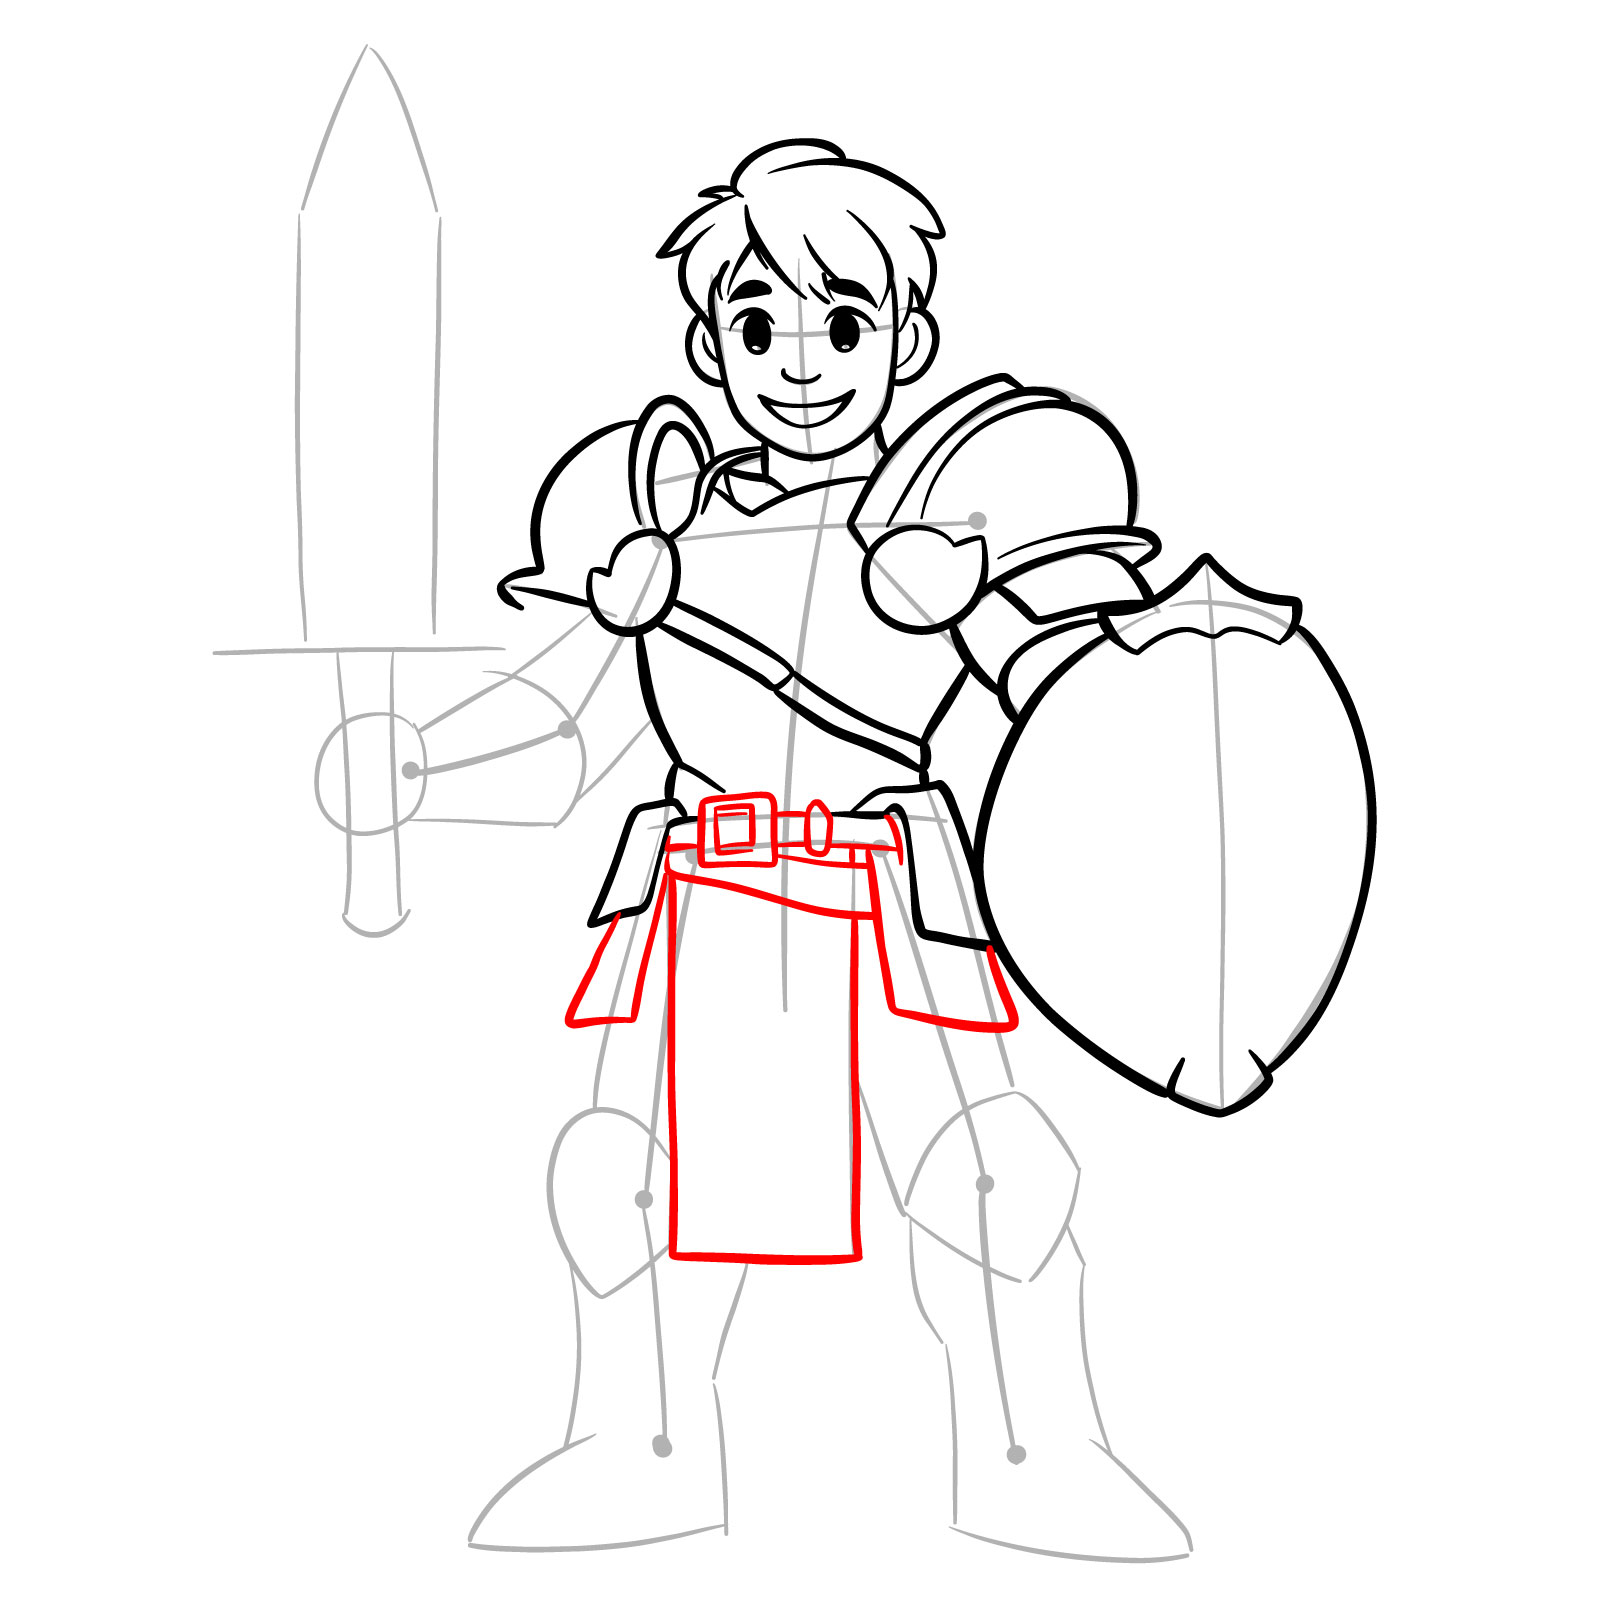 paladin step 13: detailing body and accessories